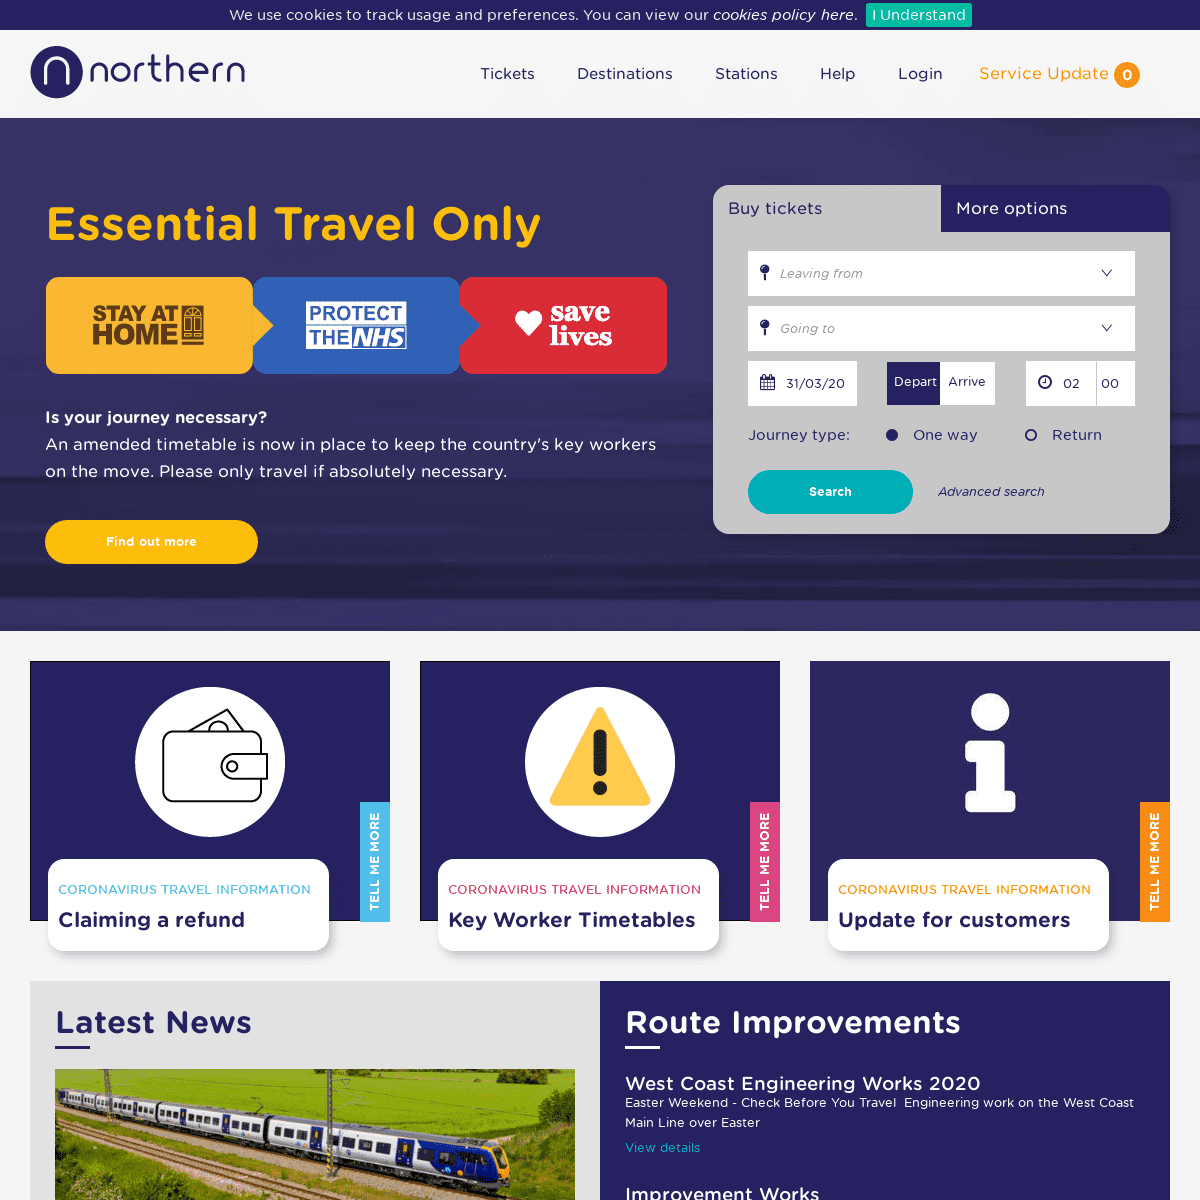 A complete backup of northernrailway.co.uk